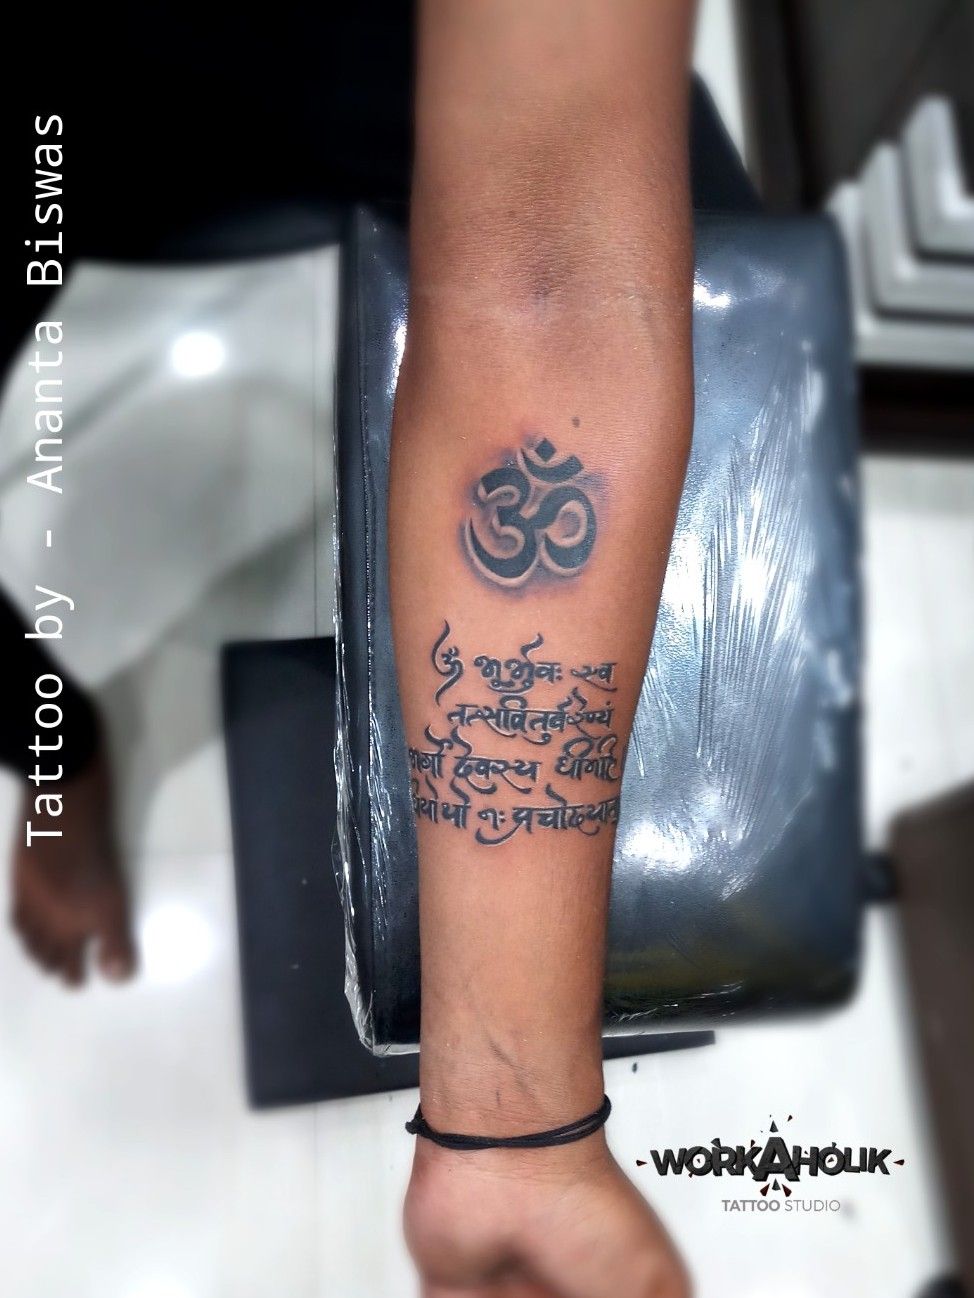 inkspired  Rudraksh with om band tattoo done by inkspired  Facebook